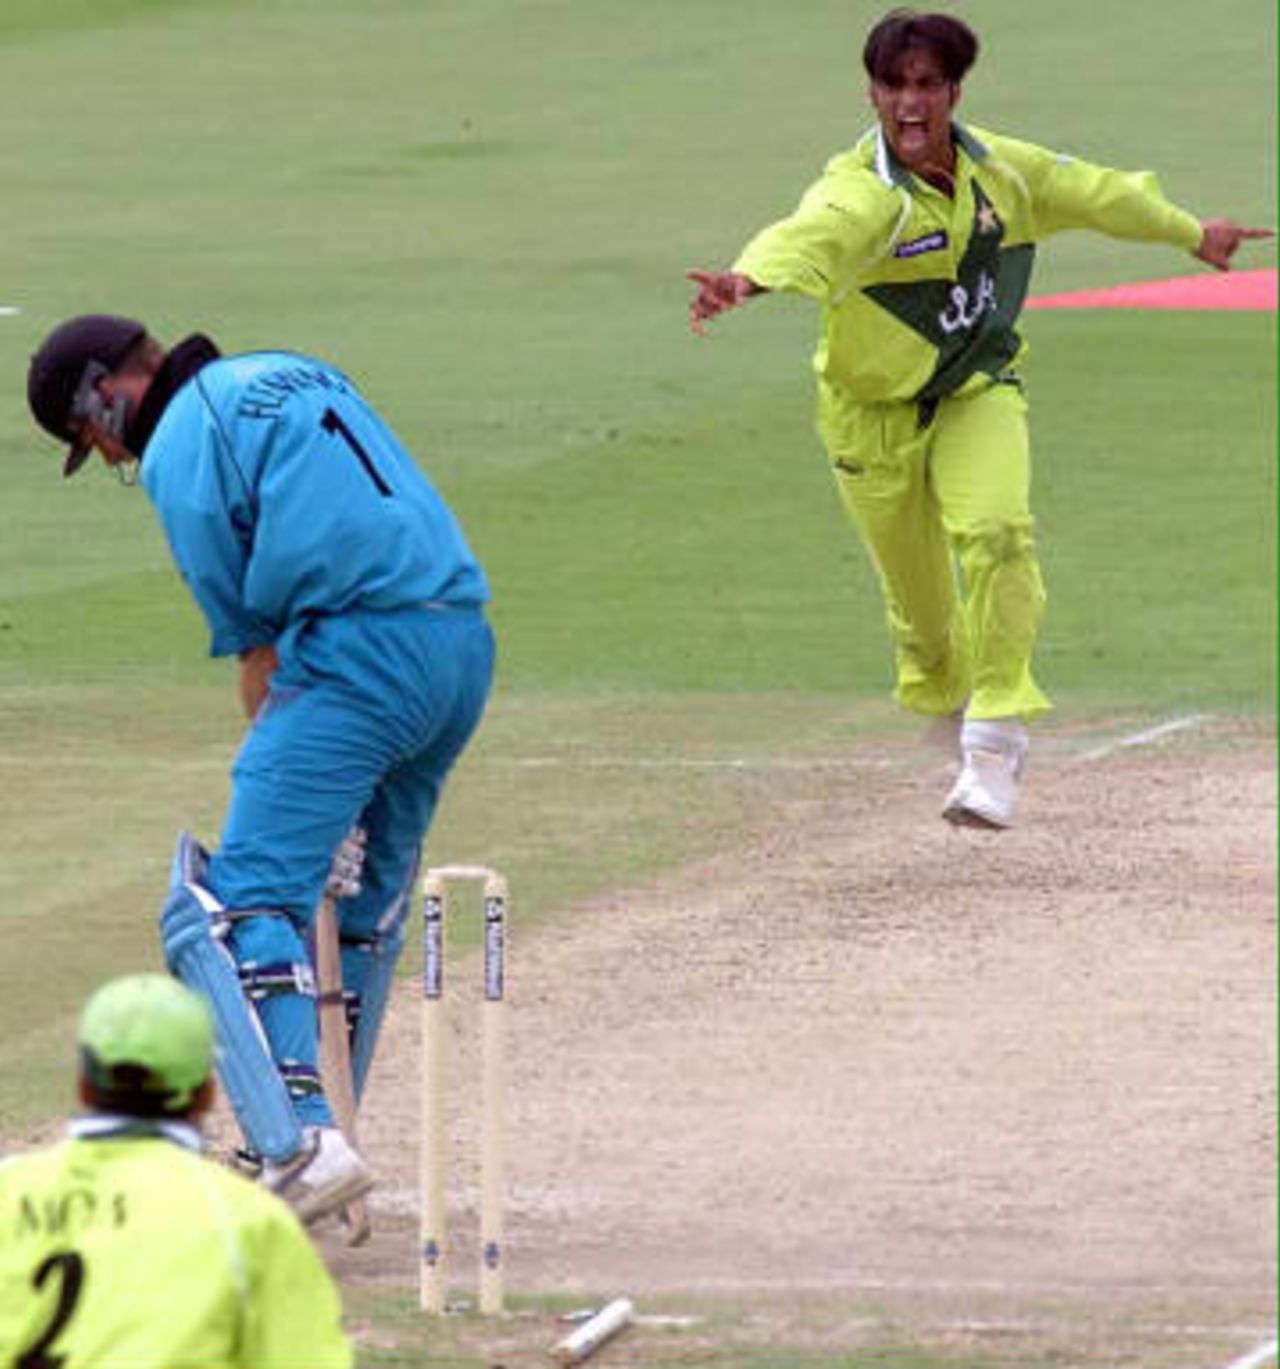 Shoaib Akhtar (R) of Pakistan shows his joy at taking the wicket of Stephen Fleming of New Zealand in their Cricket World Cup semi-final at Old Trafford in Manchester 16 June 1999